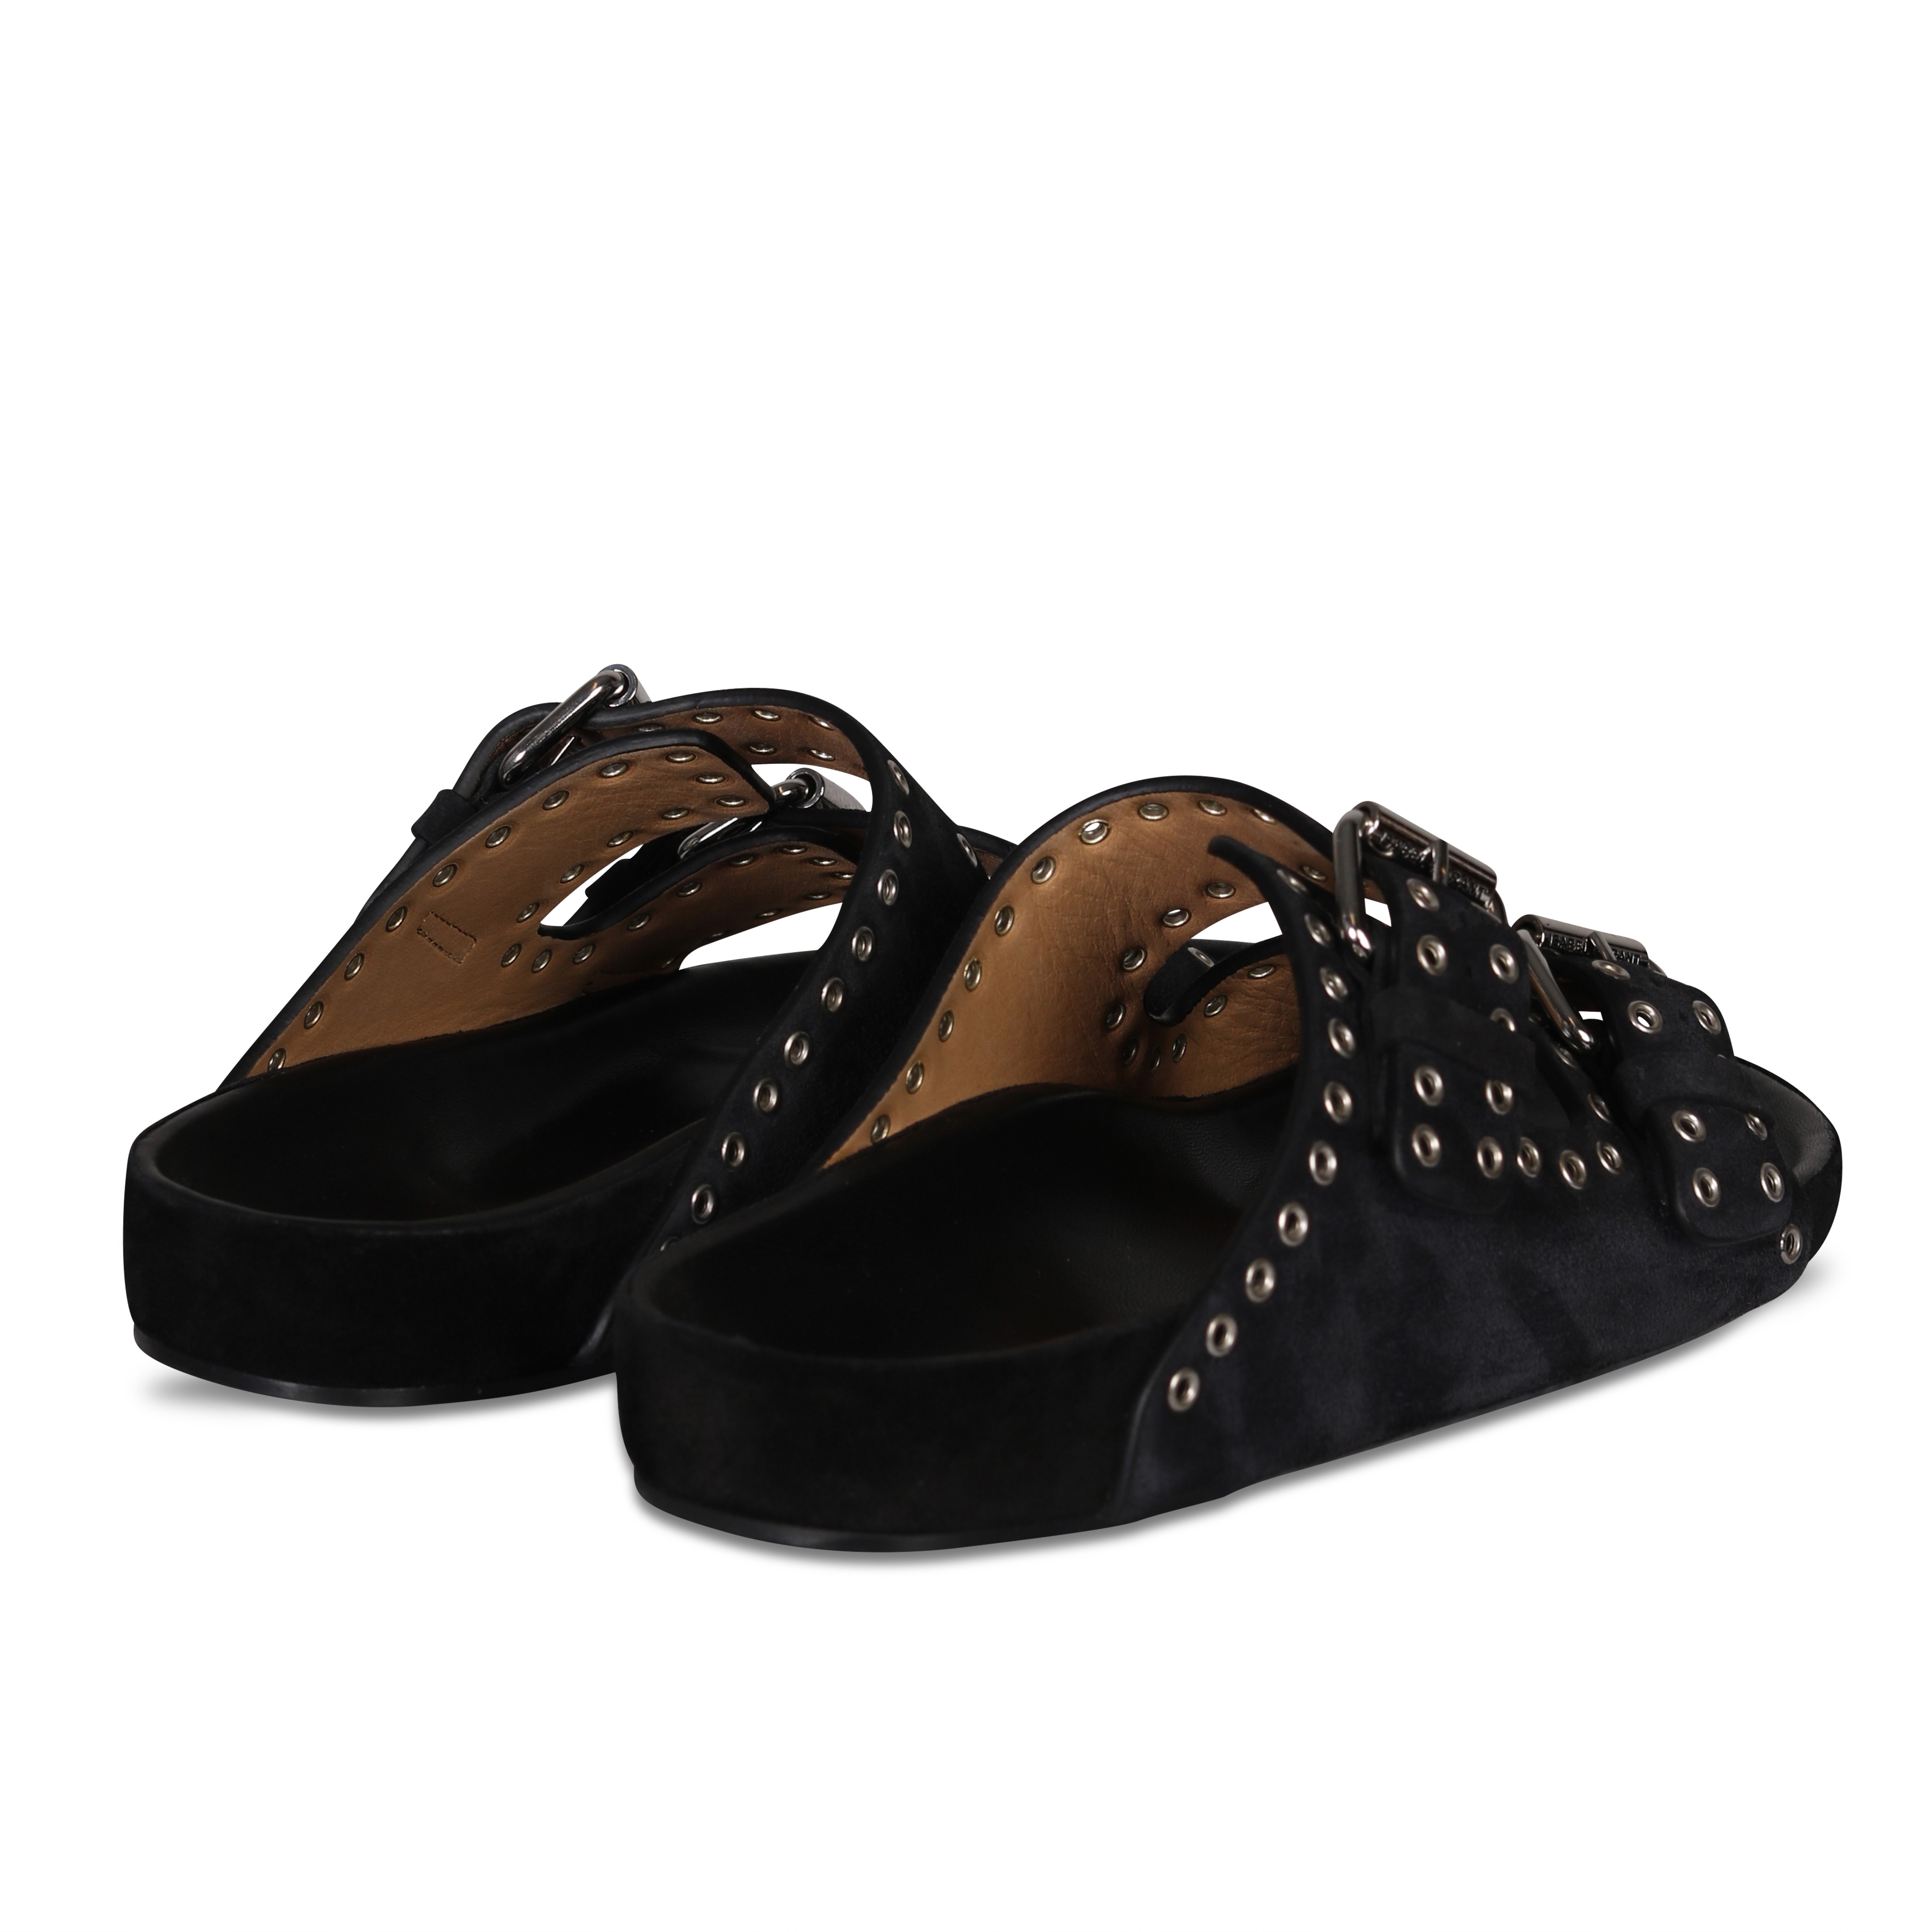 Isabel Marant Sandals Lennyo Studs Faded Black Suede